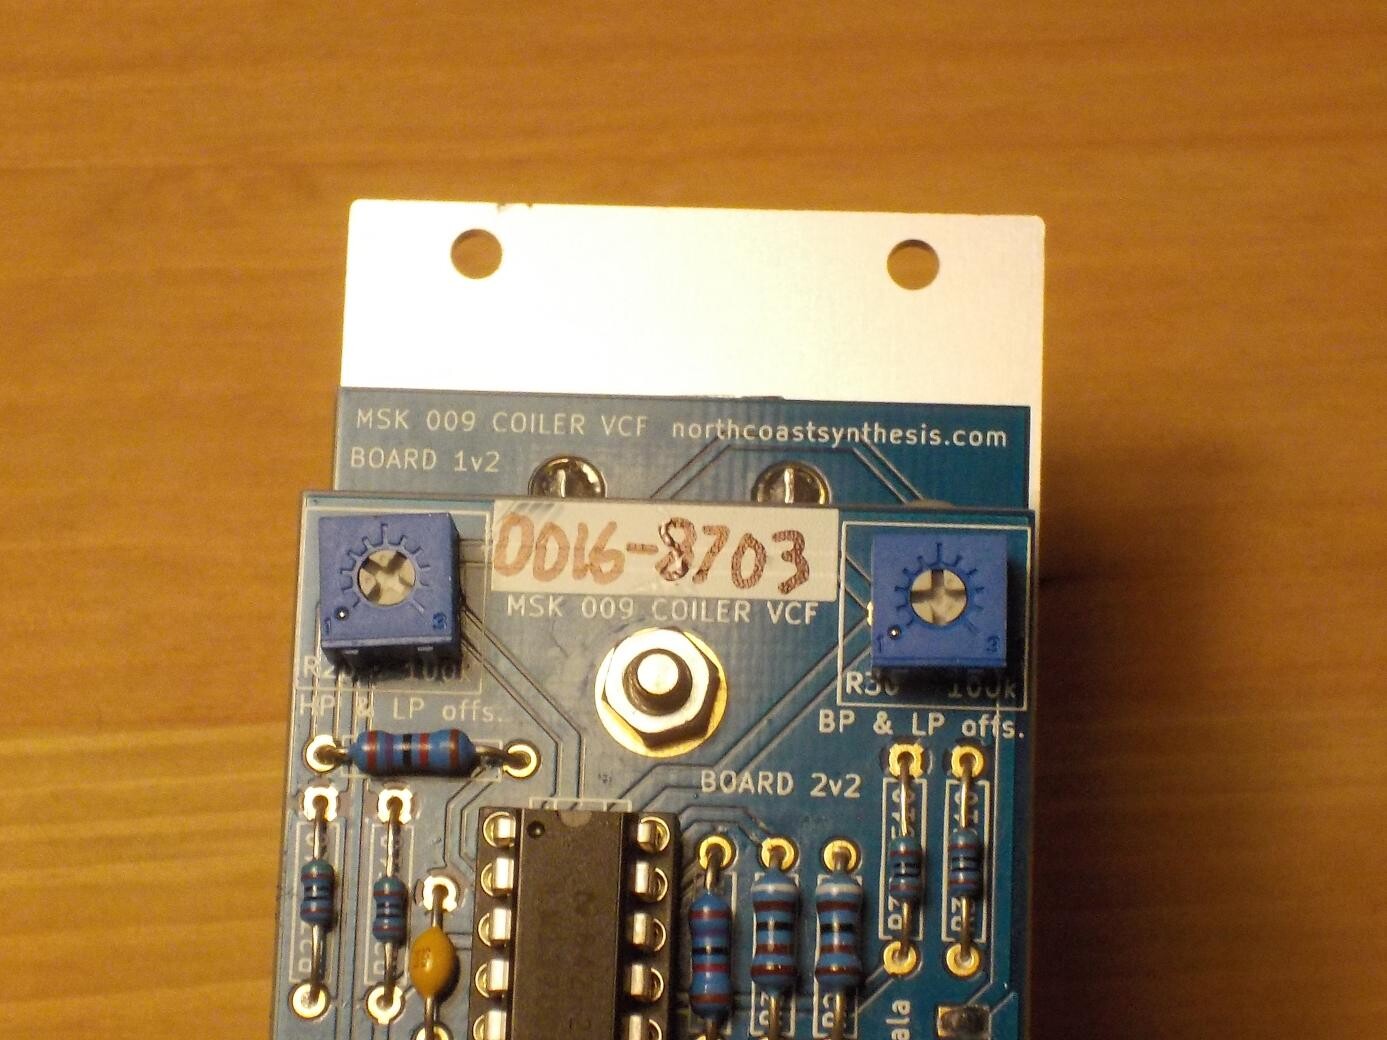 view of a module showing the eight-digit serial number